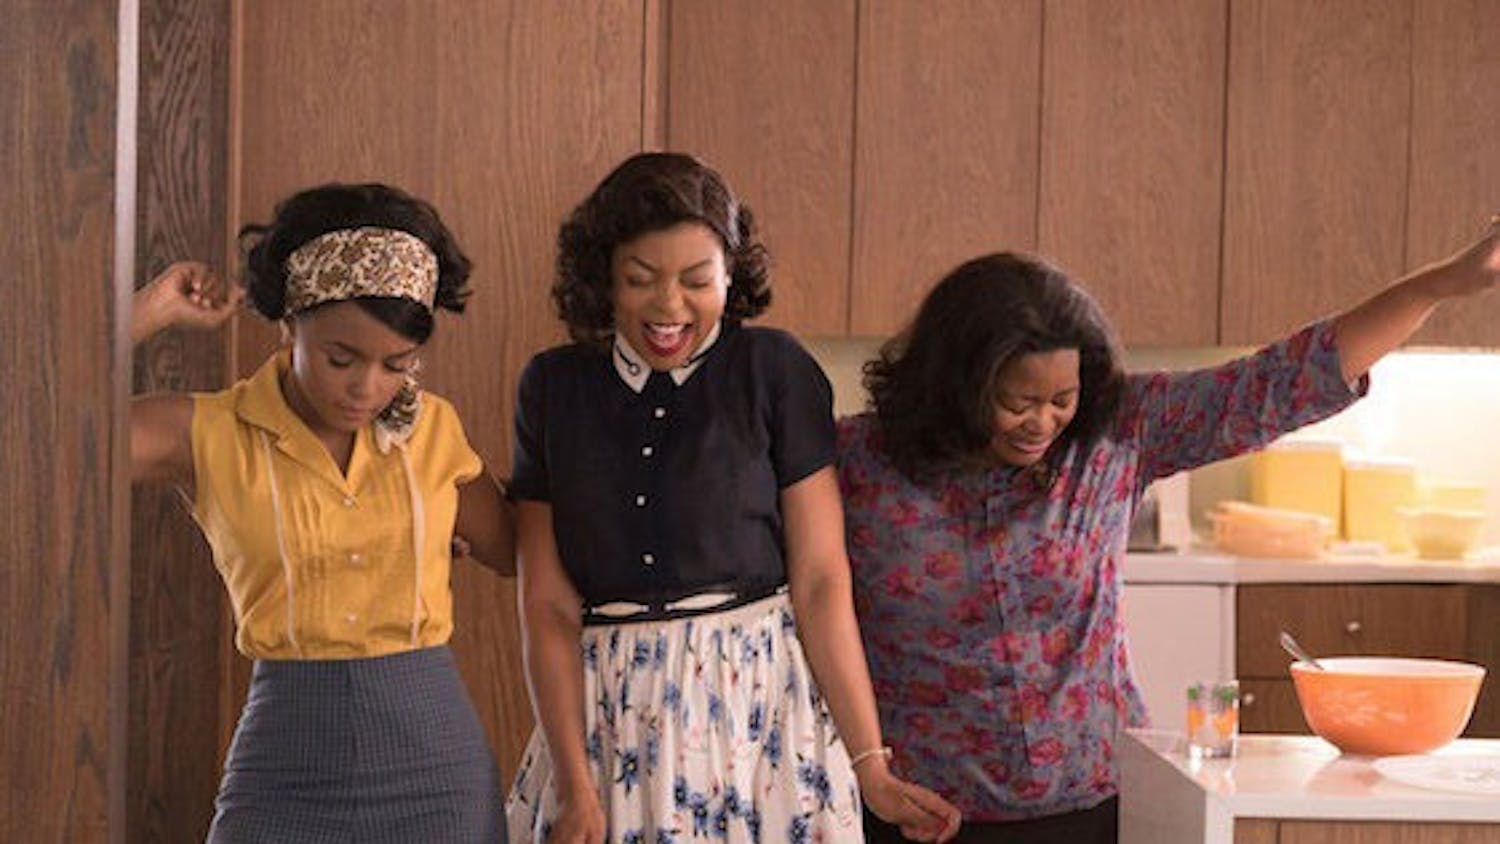 Hidden Figures is the story of Katherine G. Johnson, Dorothy Vaughan and Mary Jackson who are African-American women working at NASA. It was nominated for Best Picture. (20th Century Fox/TNS)